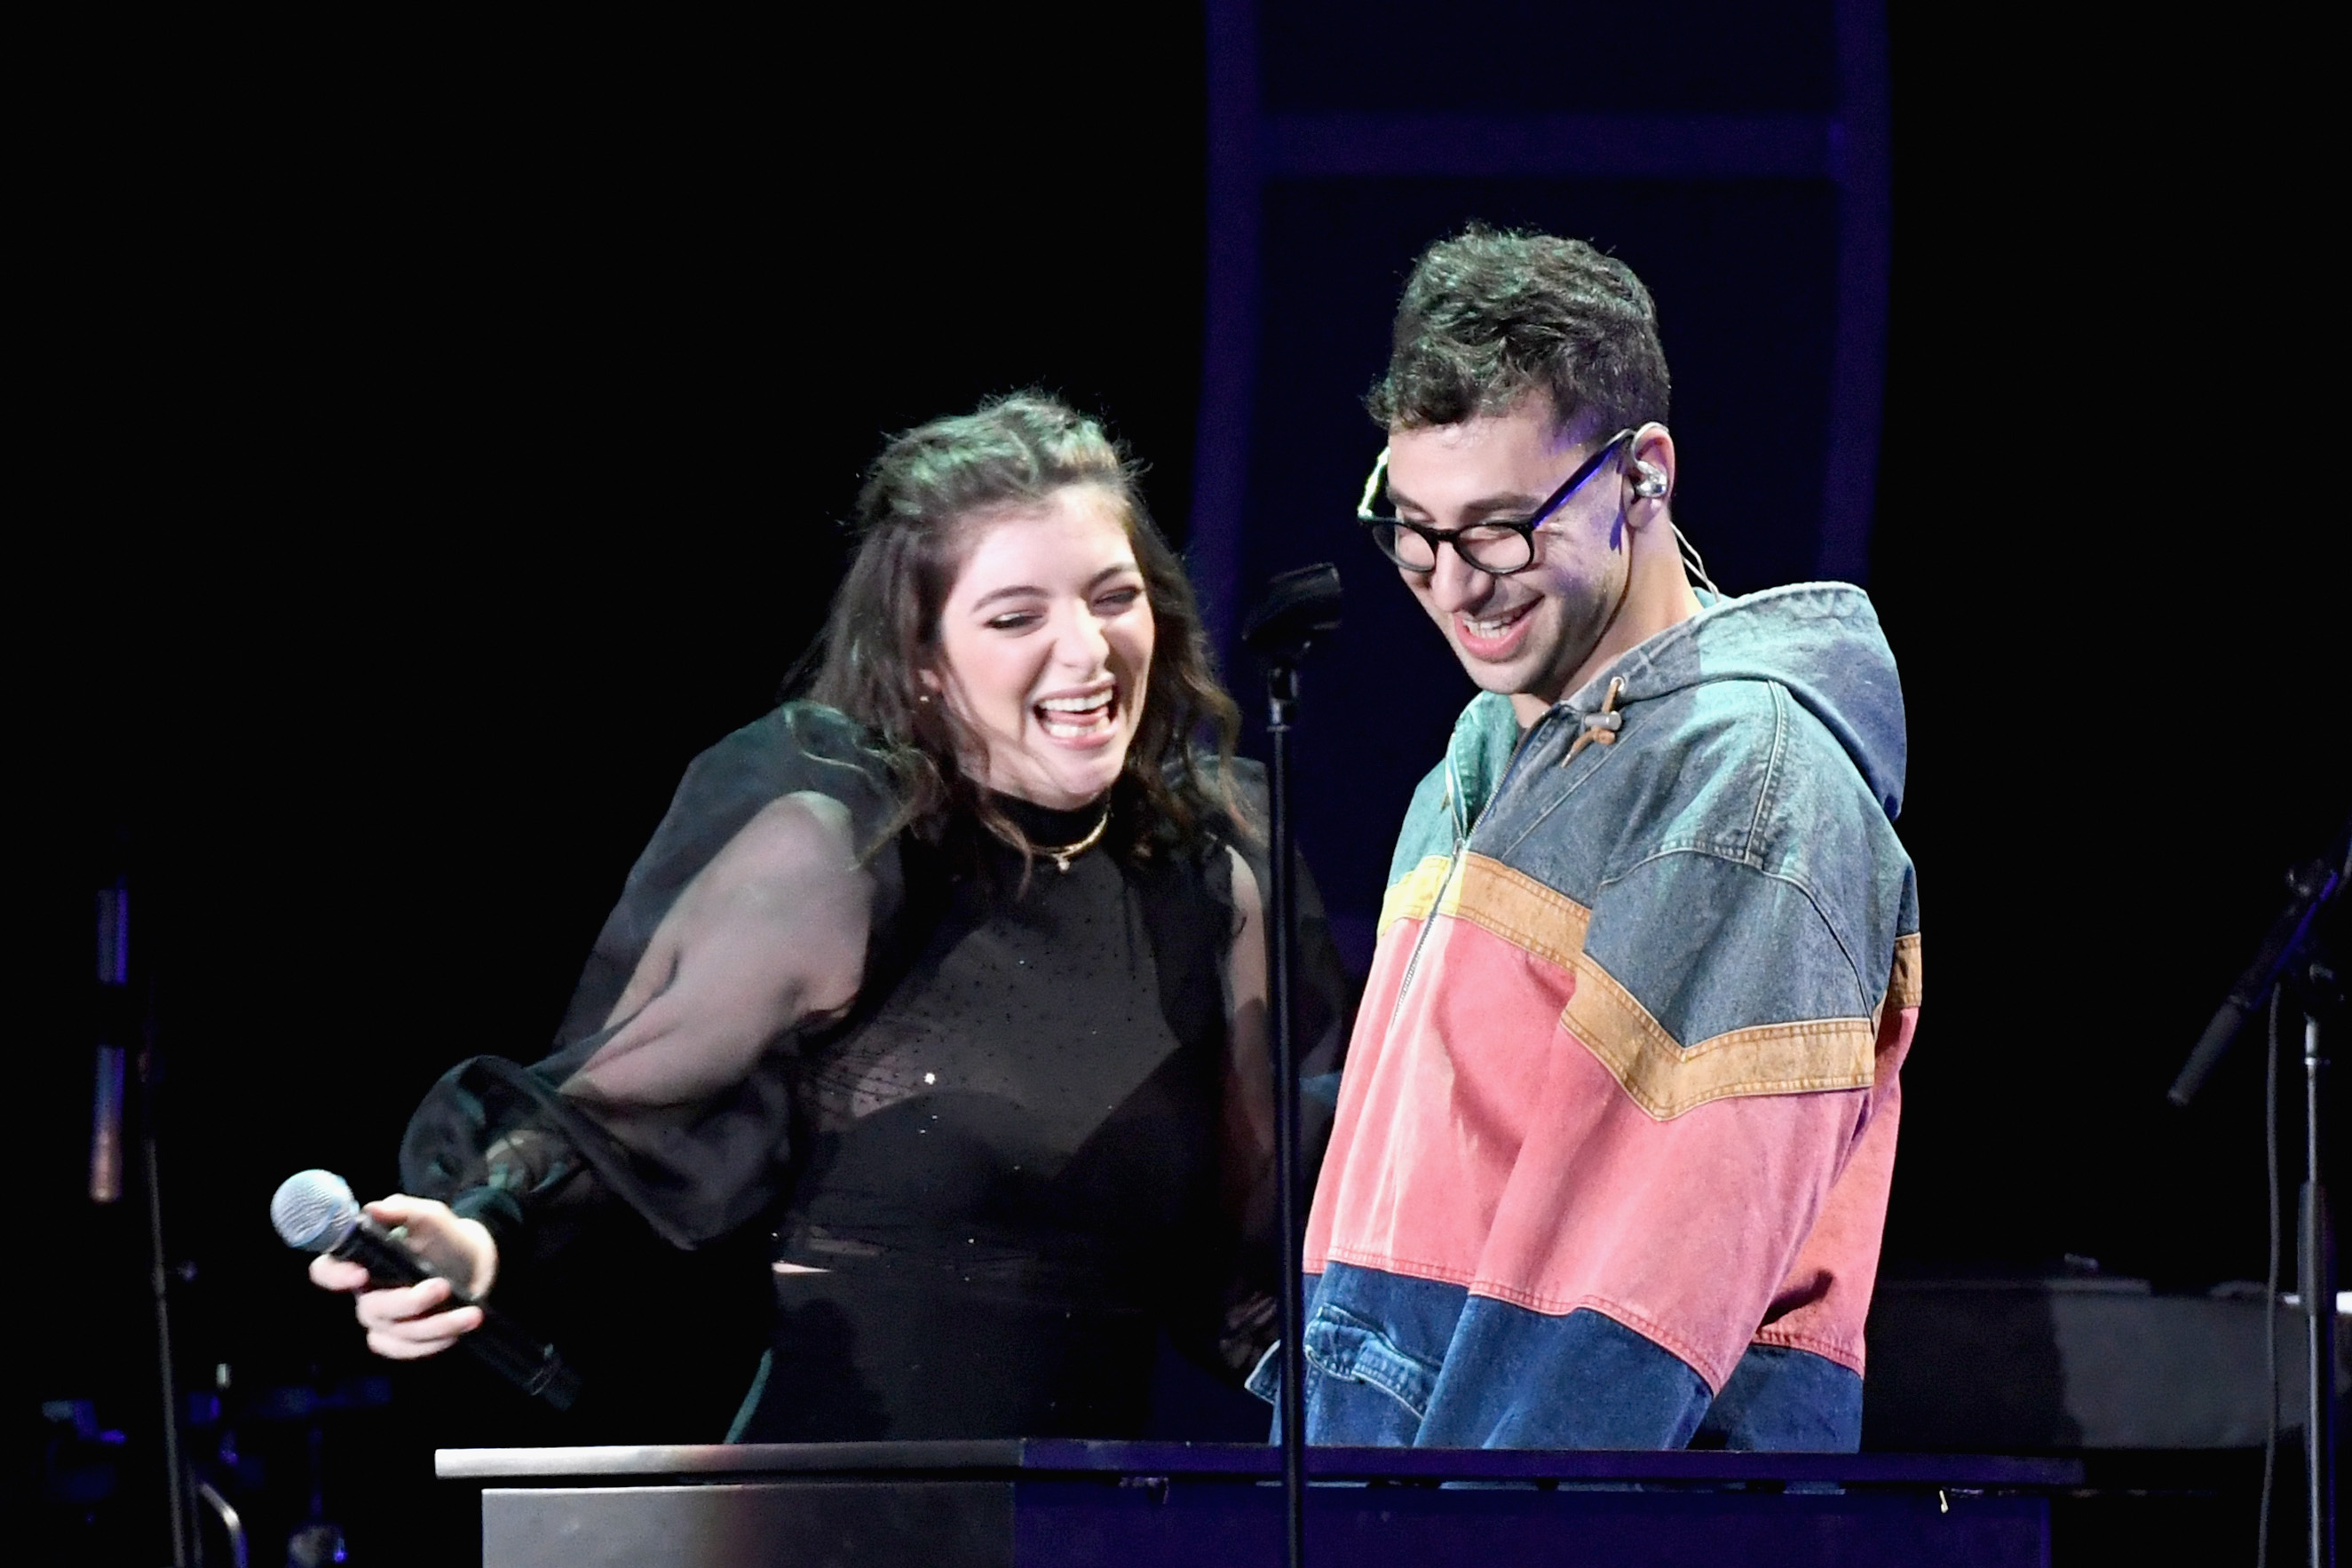 Lorde and Jack Antonoff perform onstage during the 2017 iHeartRadio Music Festival